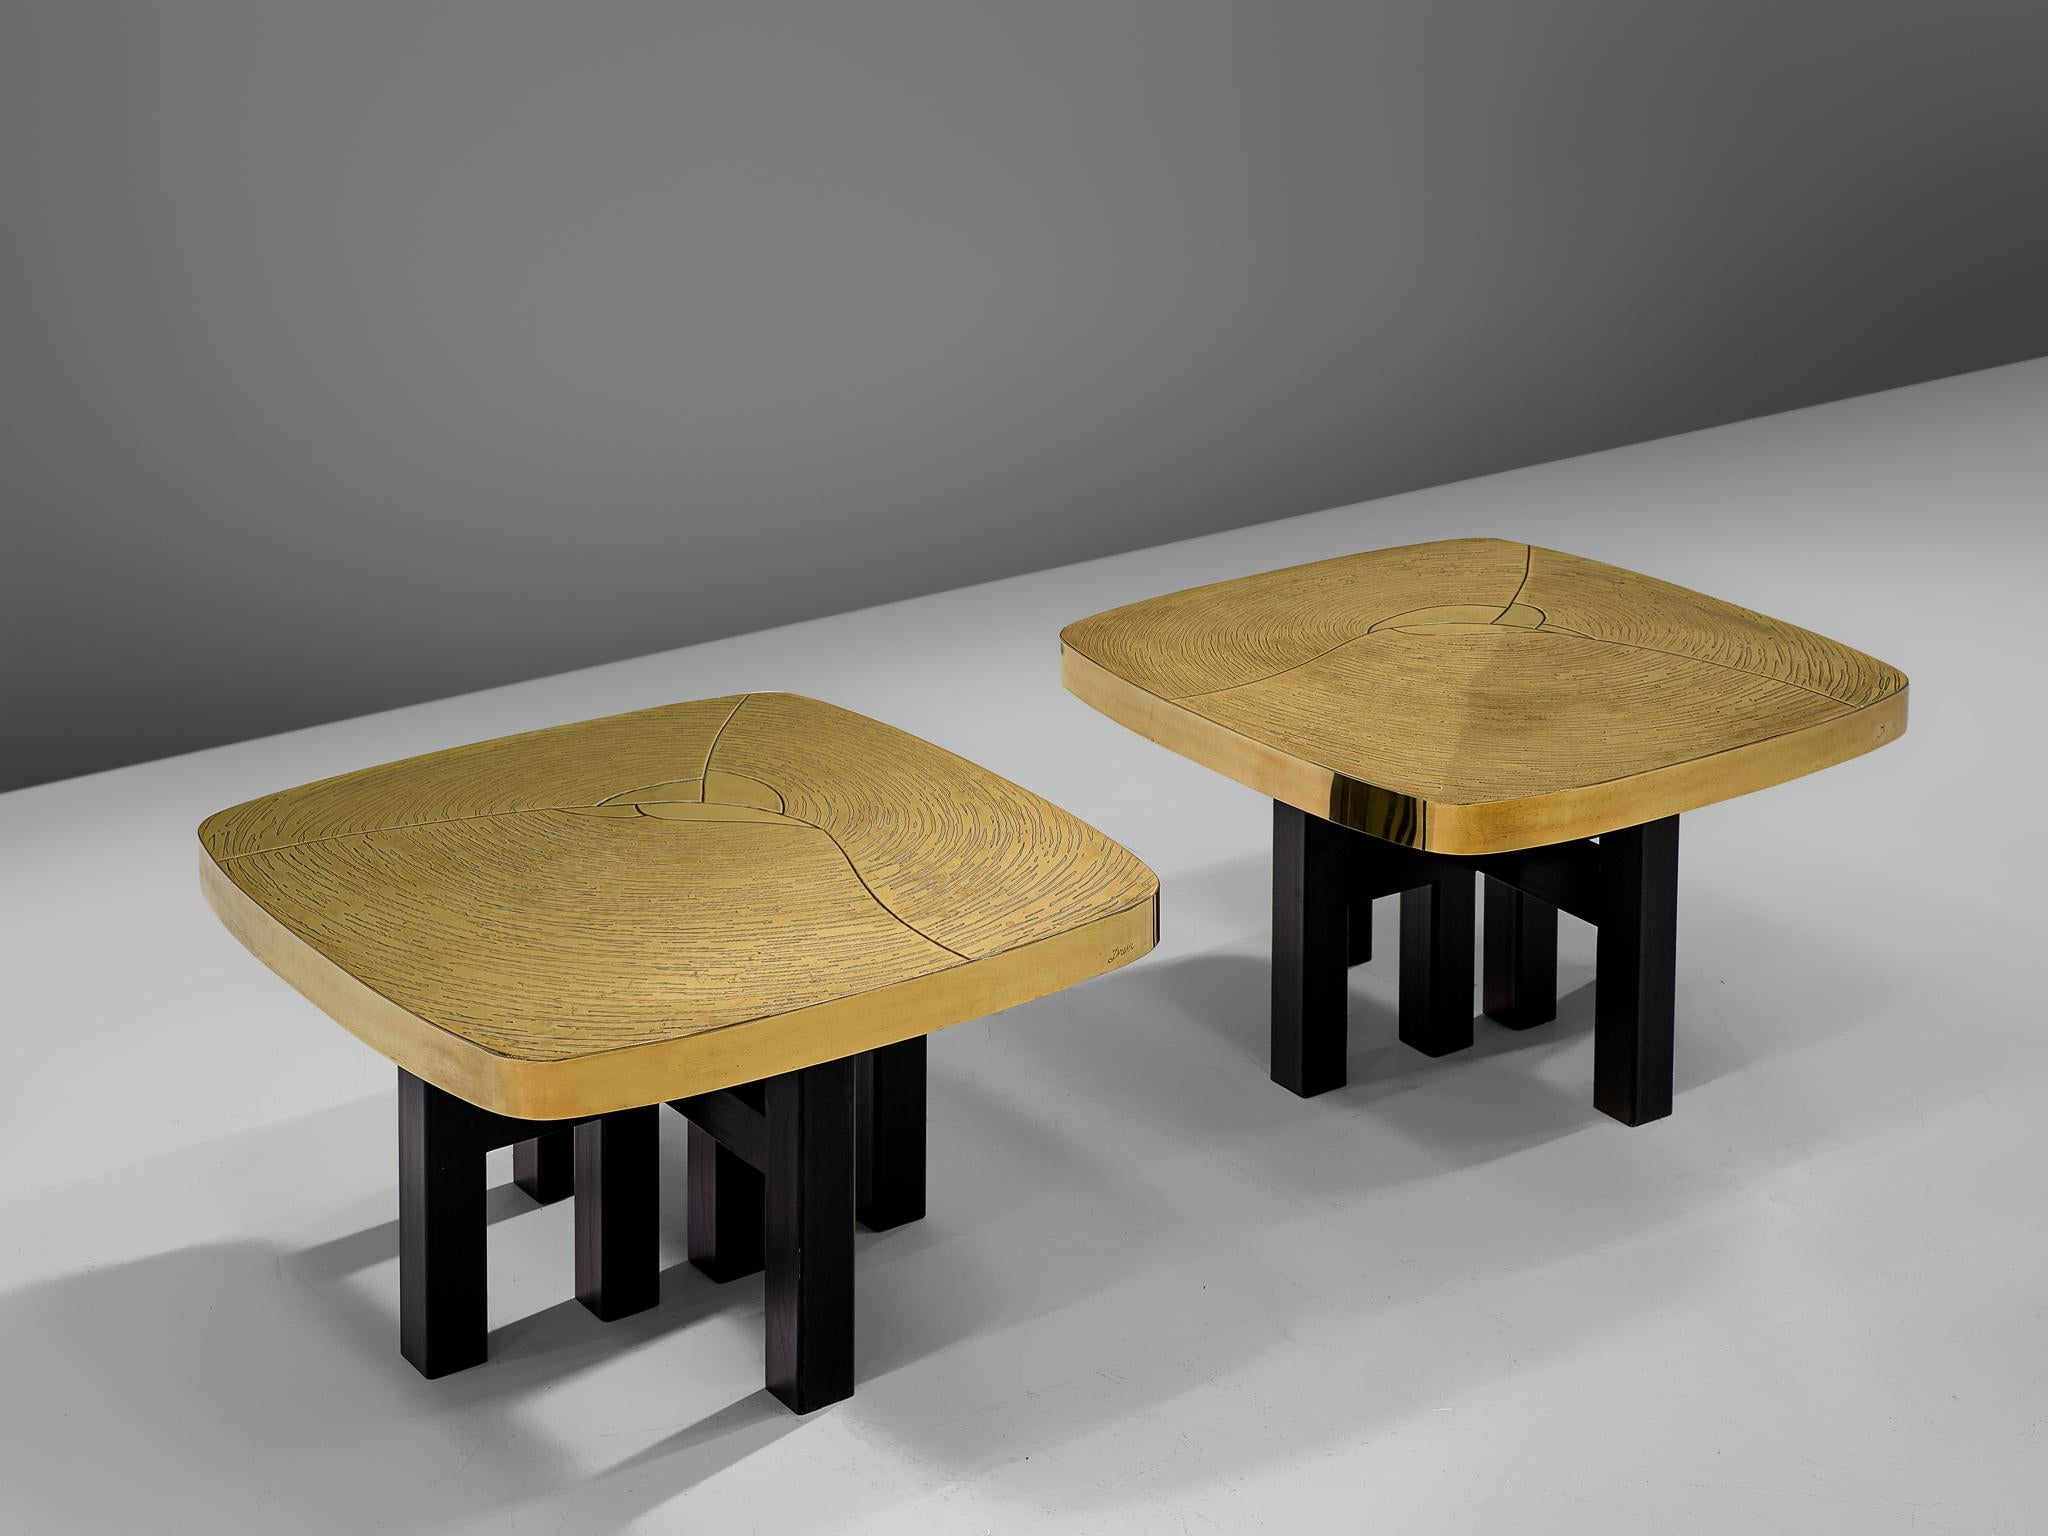 Jean Claude Dresse, pair of side tables, etched brass and steel, Belgium, 1970s

Elegant pair of coffee tables by the Belgian designer and artist Jean Claude Dresse. The tables feature table tops of brass with an etched organic pattern. The tabletop